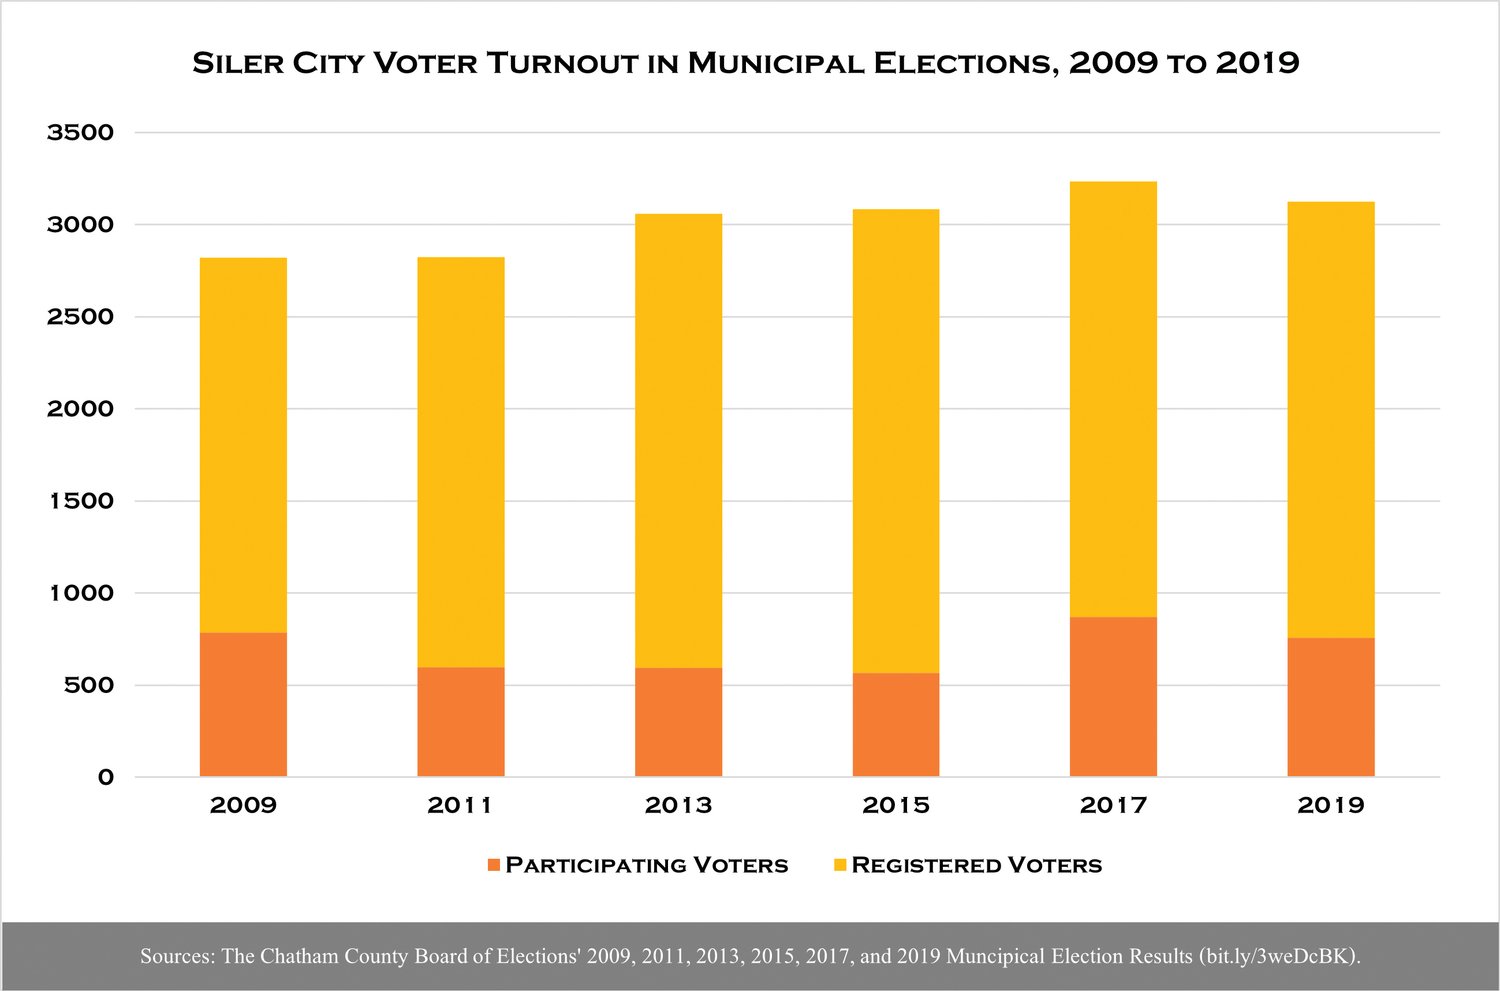 Within the last decade, less than 30% of Siler City voters turned out for the town's municipal elections. In the 2013 and 2015 town elections, turnout even dipped below 20%.